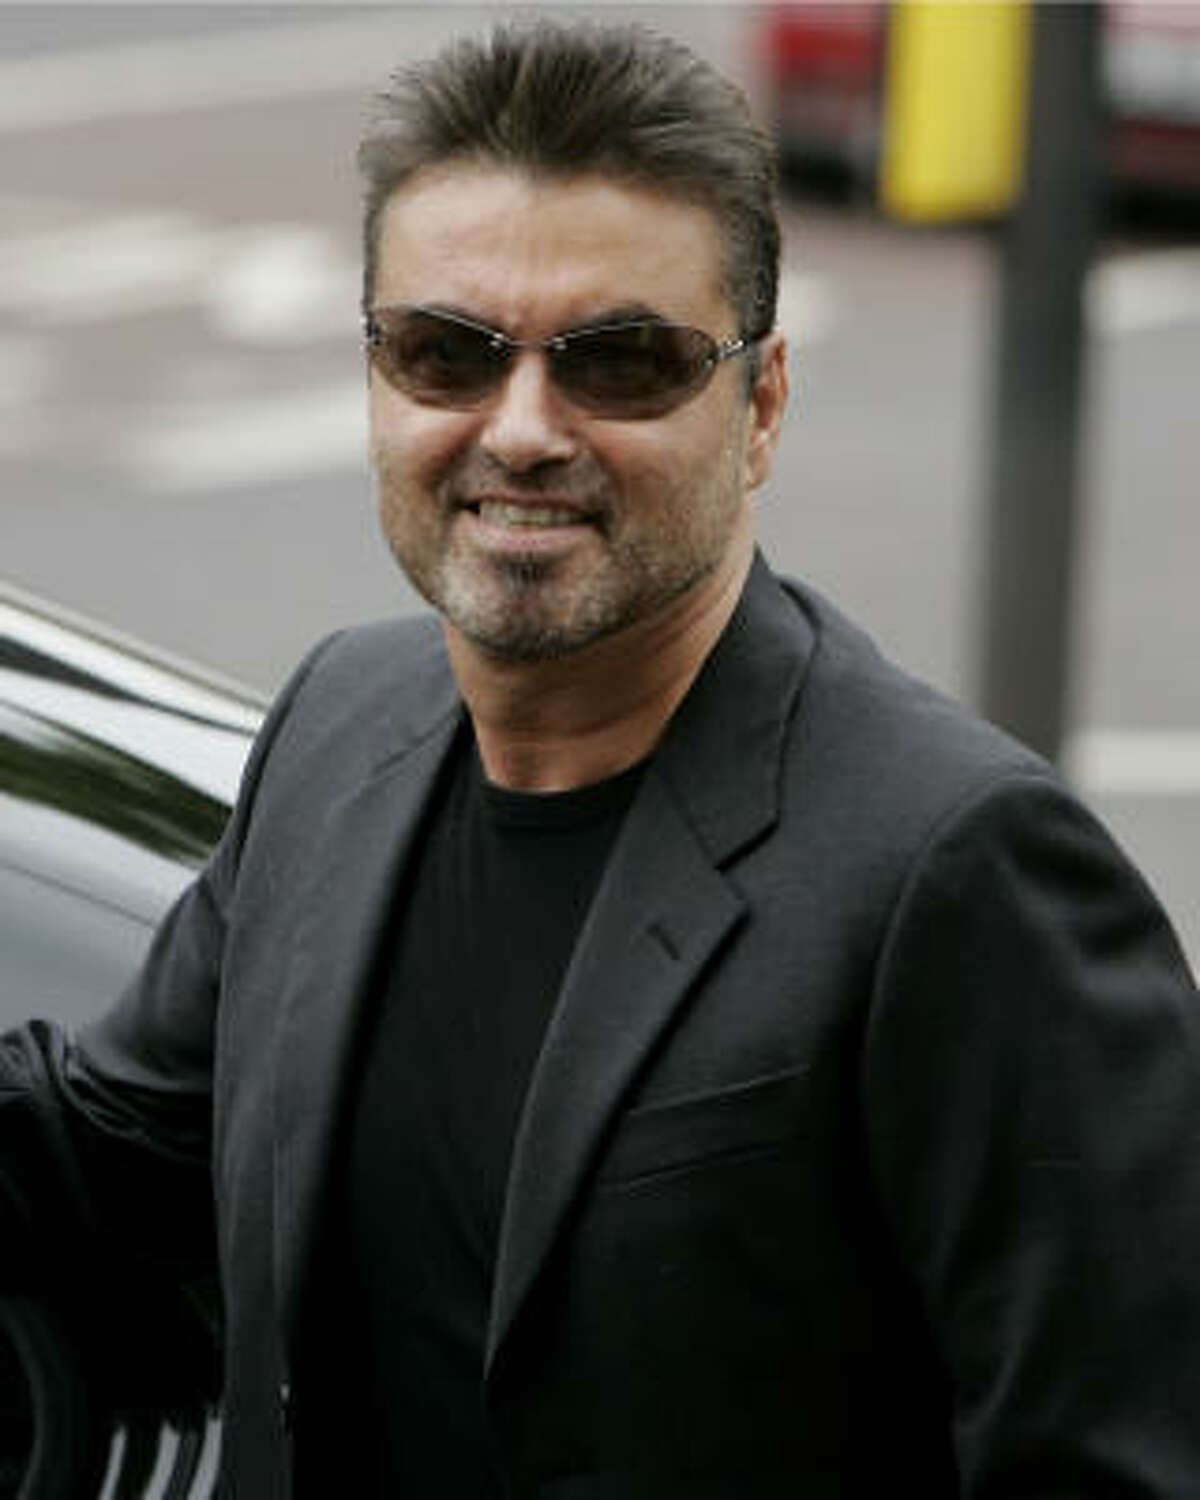 Musician George Michael arrives at Brent magistrates court in London today. Michael, whose real name is George Panayiotou, had pleaded guilty on May 8 to a charge of driving while unfit through drugs.